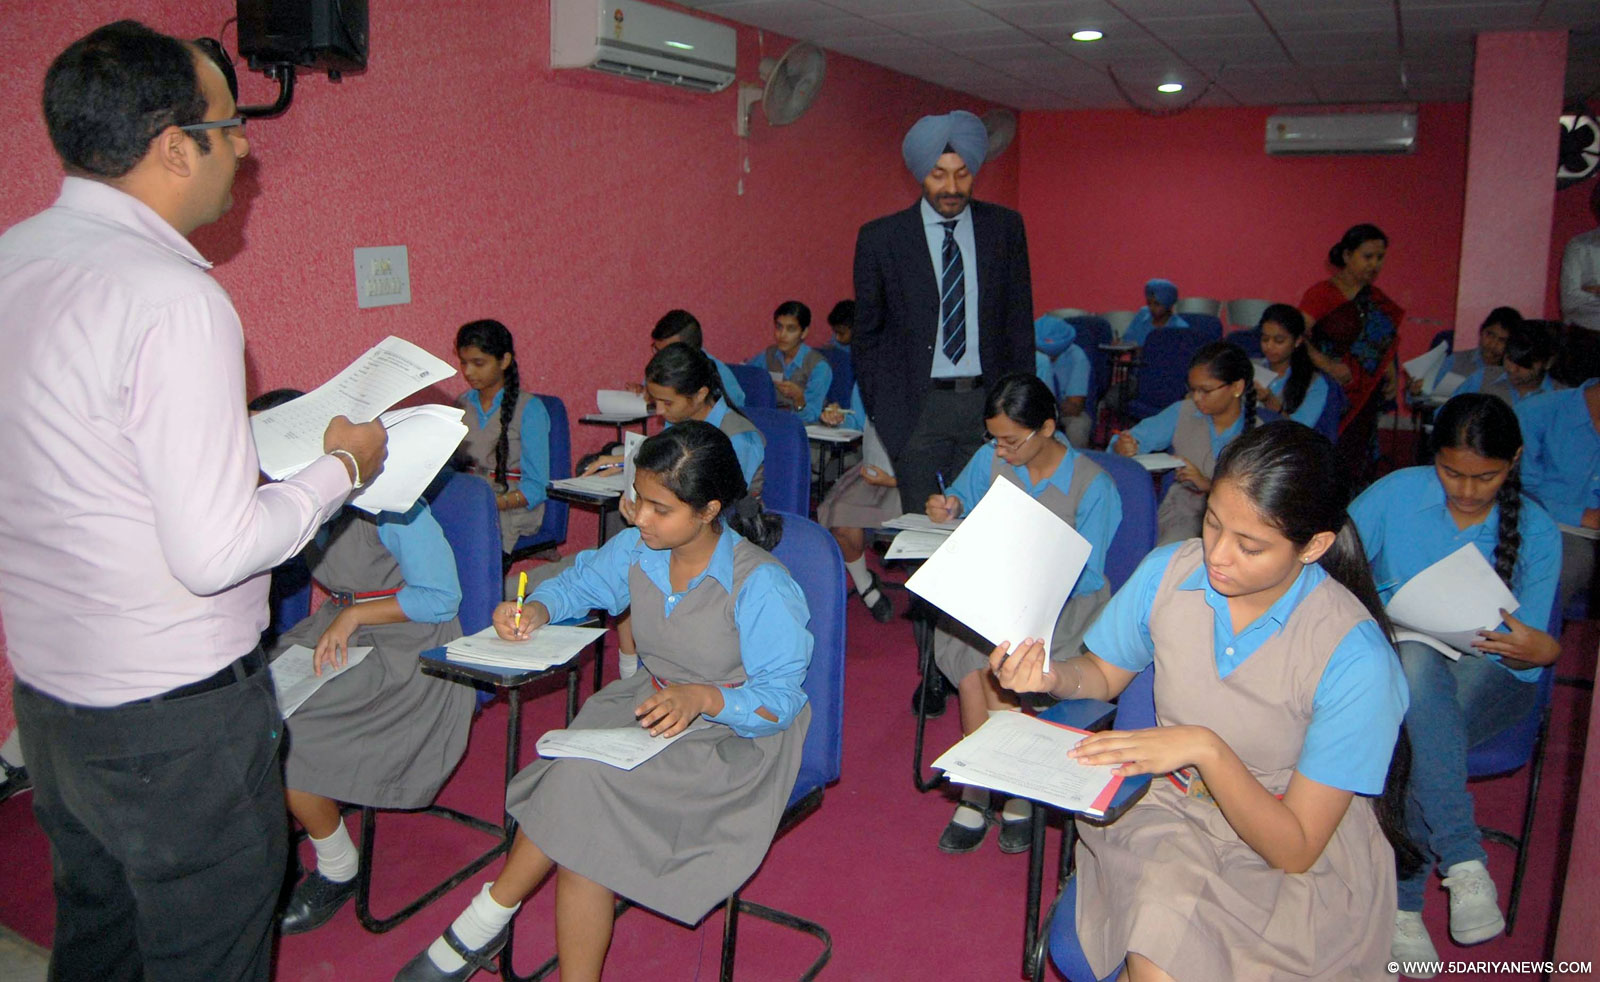 Lawrence School organized career oriented workshop on armed forces to serve the country for 11th and 12th class students